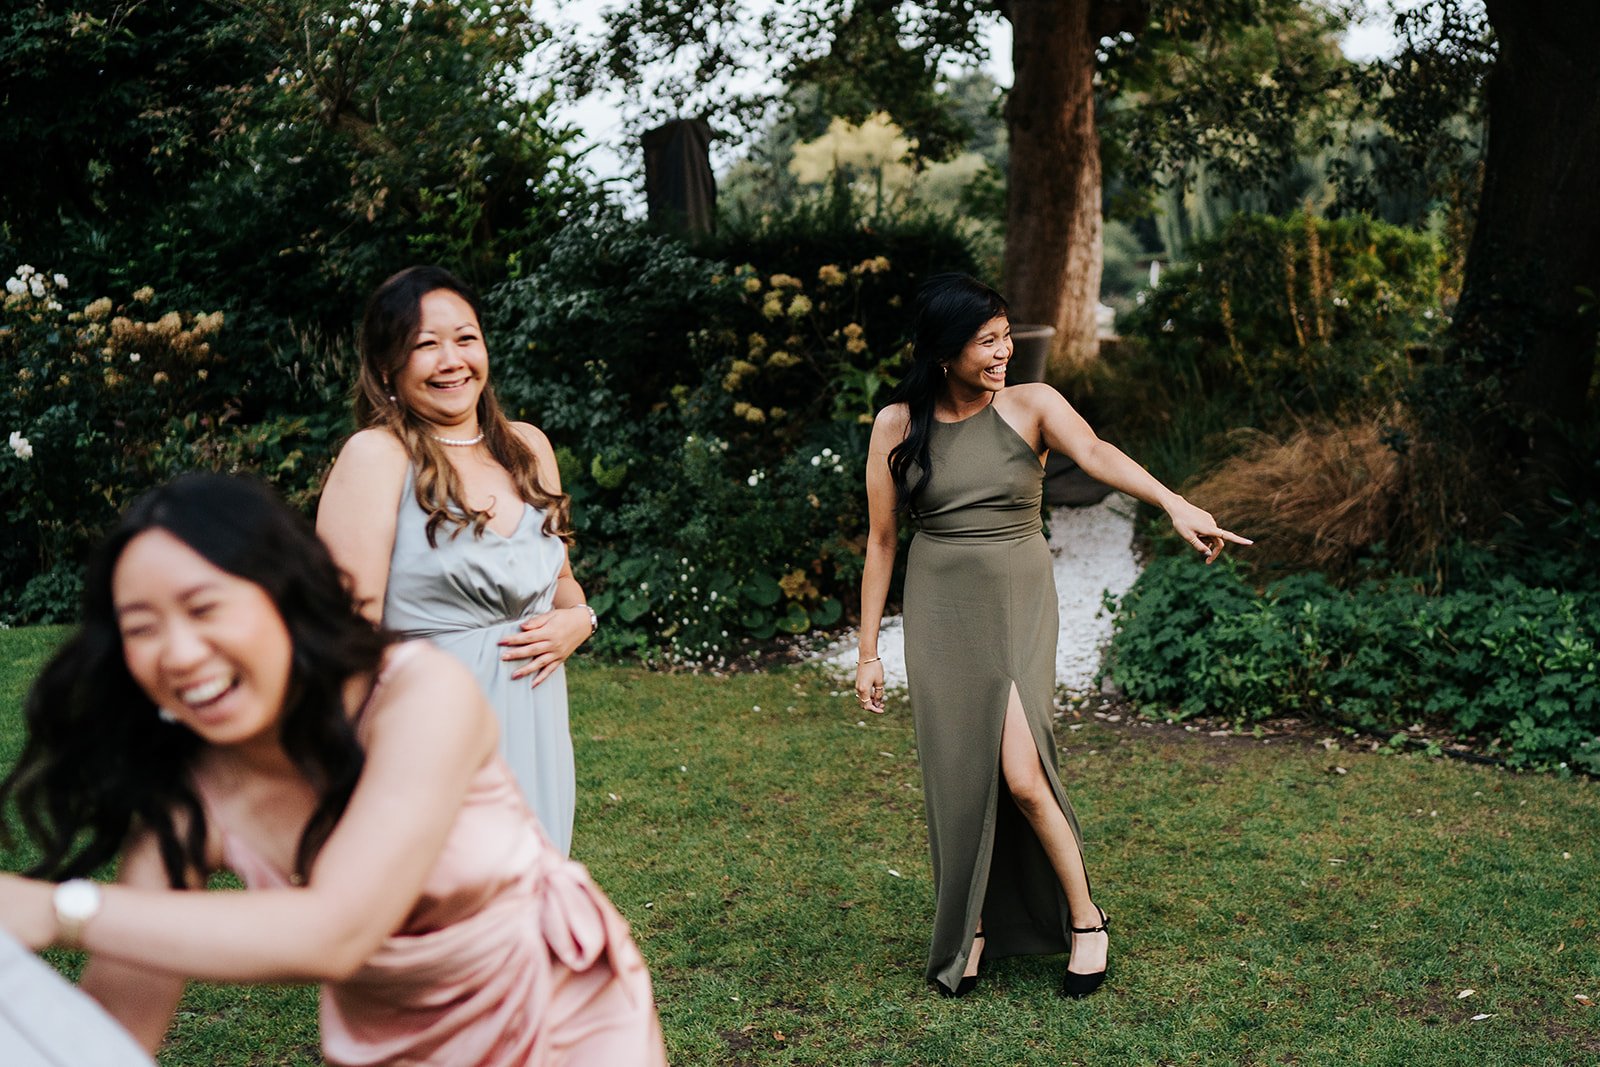 Bride's friends try to evade the bouquet in funny photograph